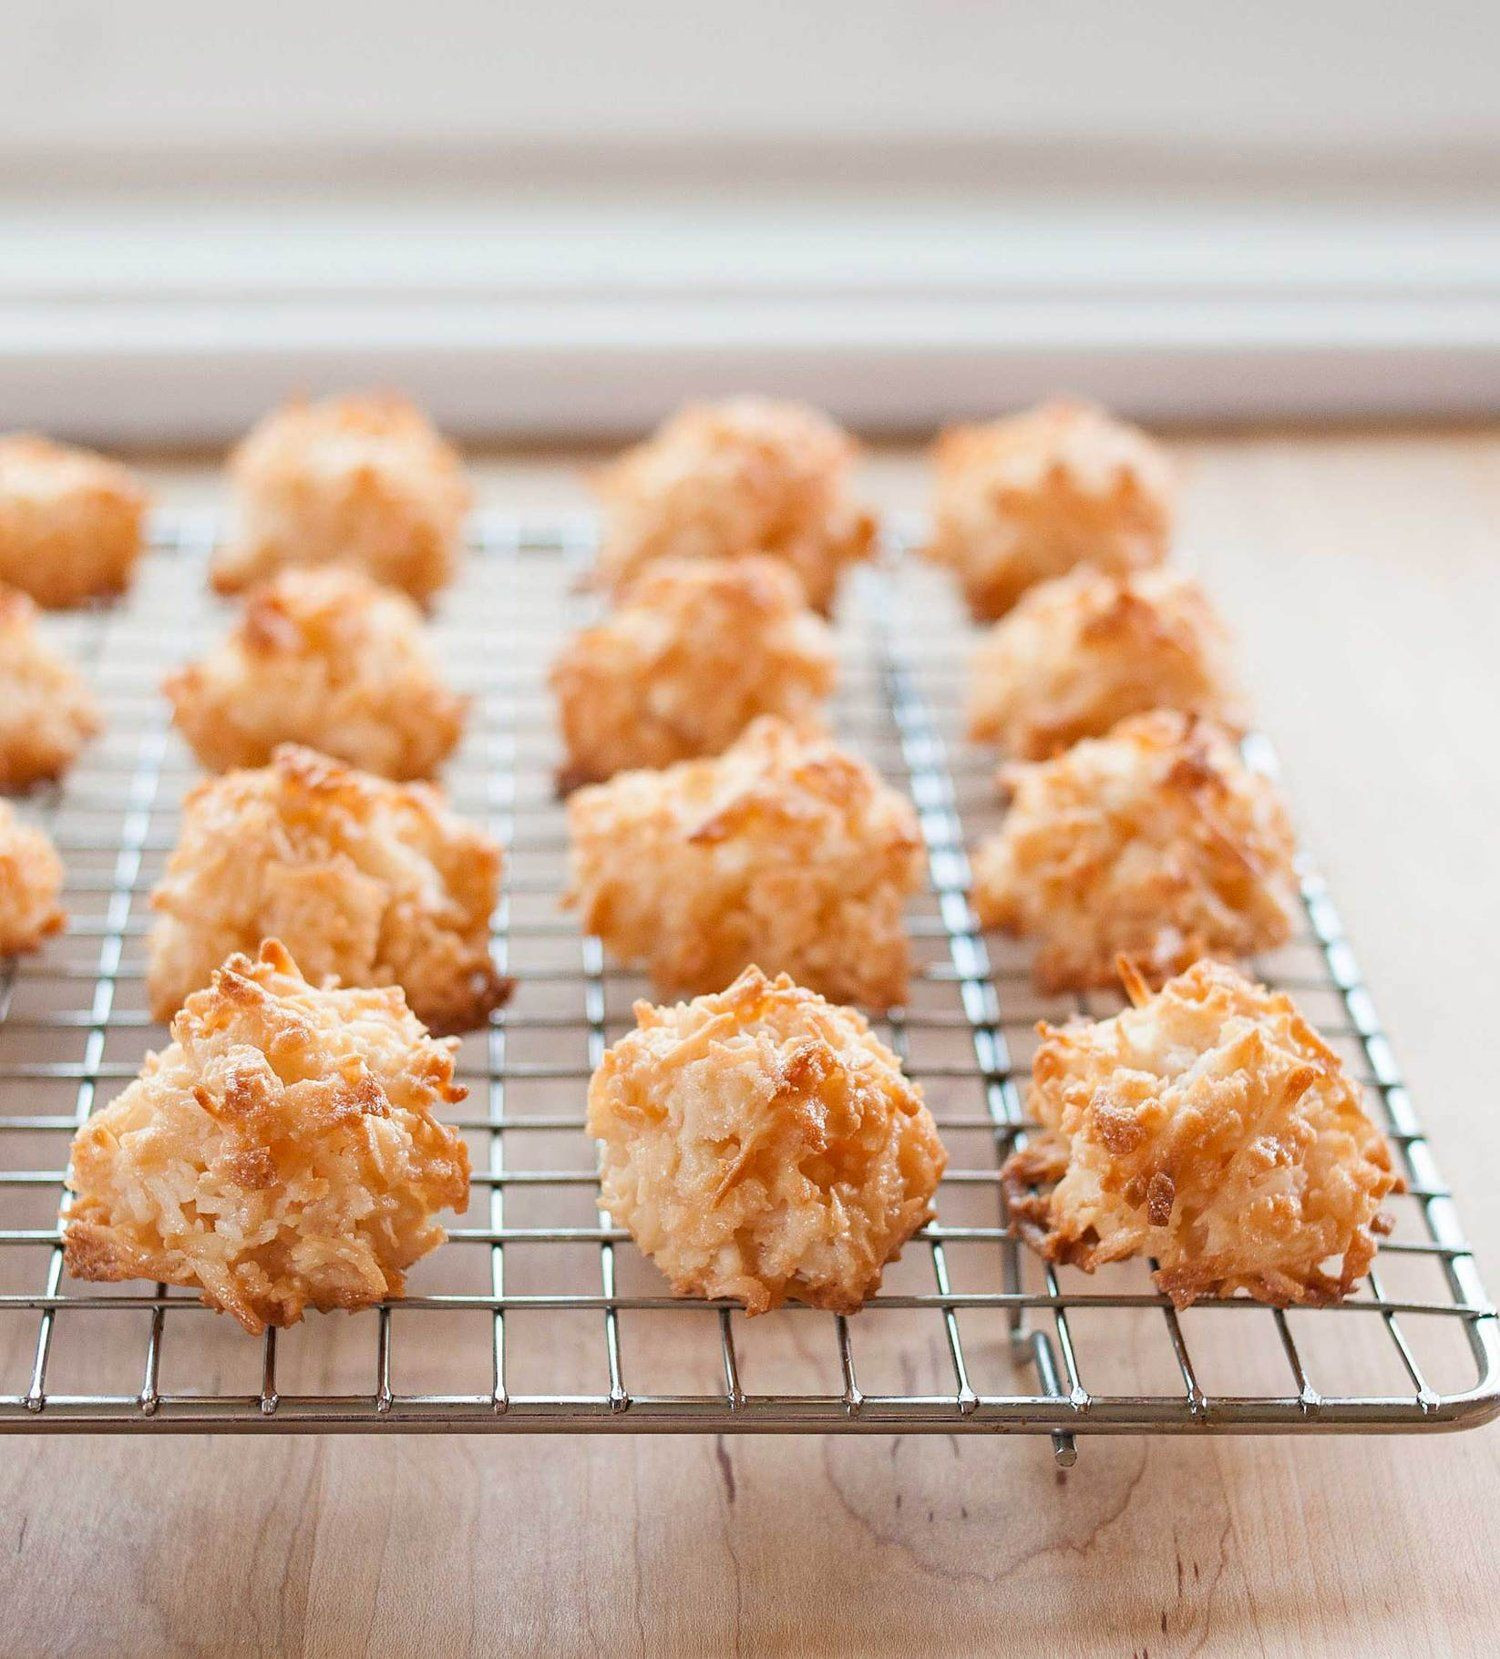 Passover Coconut Macaroon Recipe
 How To Make the Best Coconut Macaroons Recipe